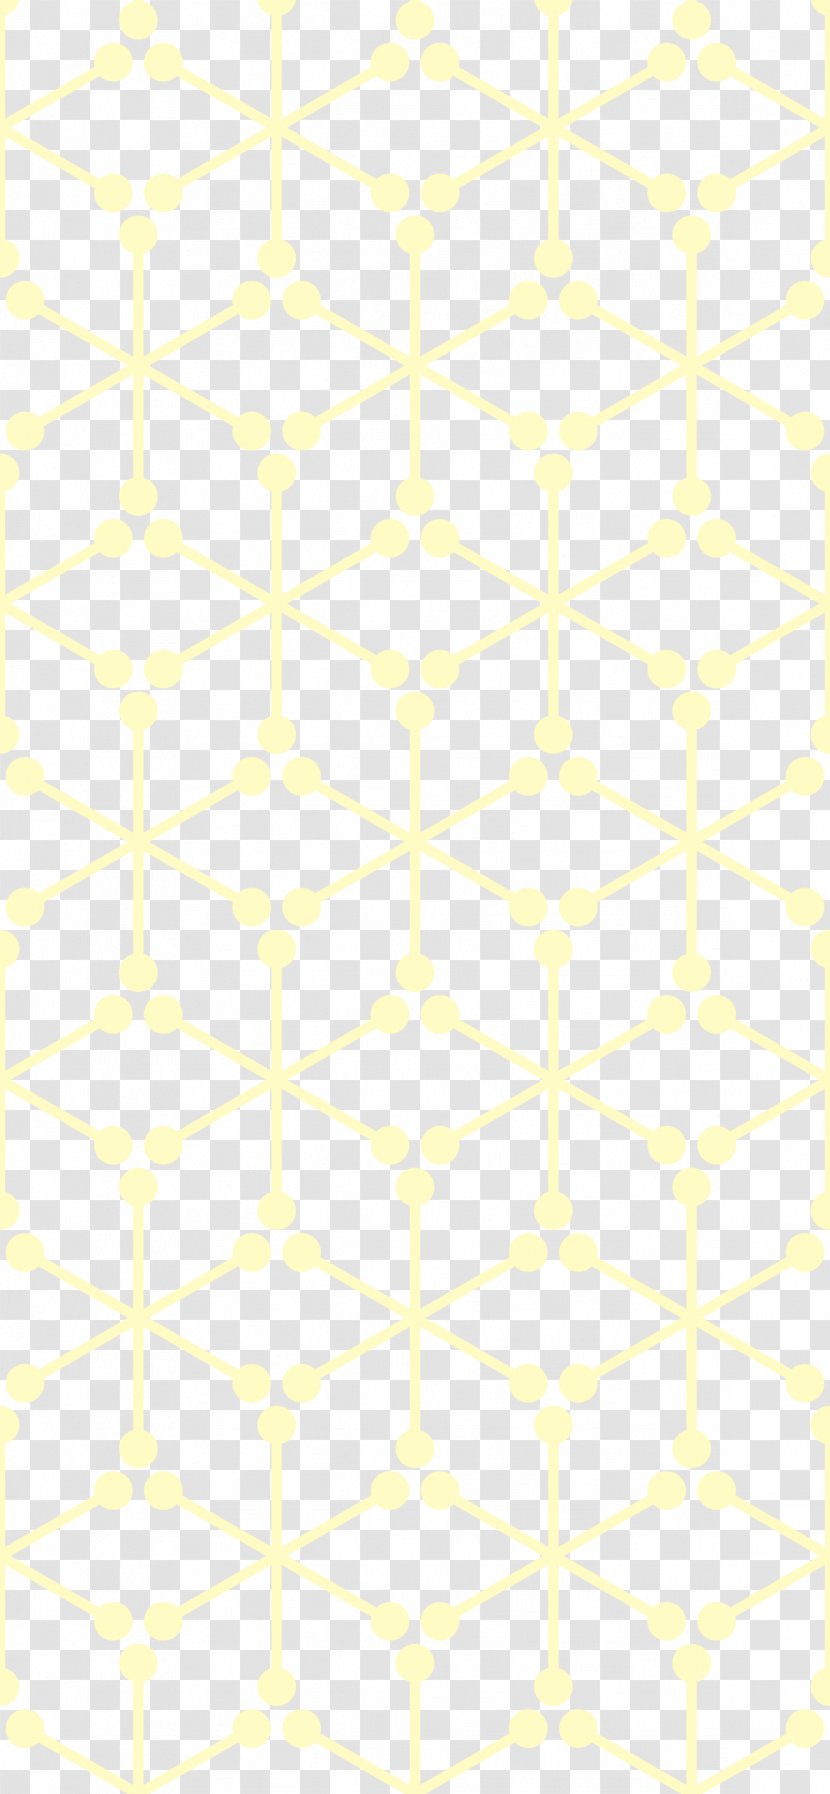 Symmetry Yellow Area Angle Pattern - Rectangle - Hexagonal Snowflake Cloth Transparent PNG